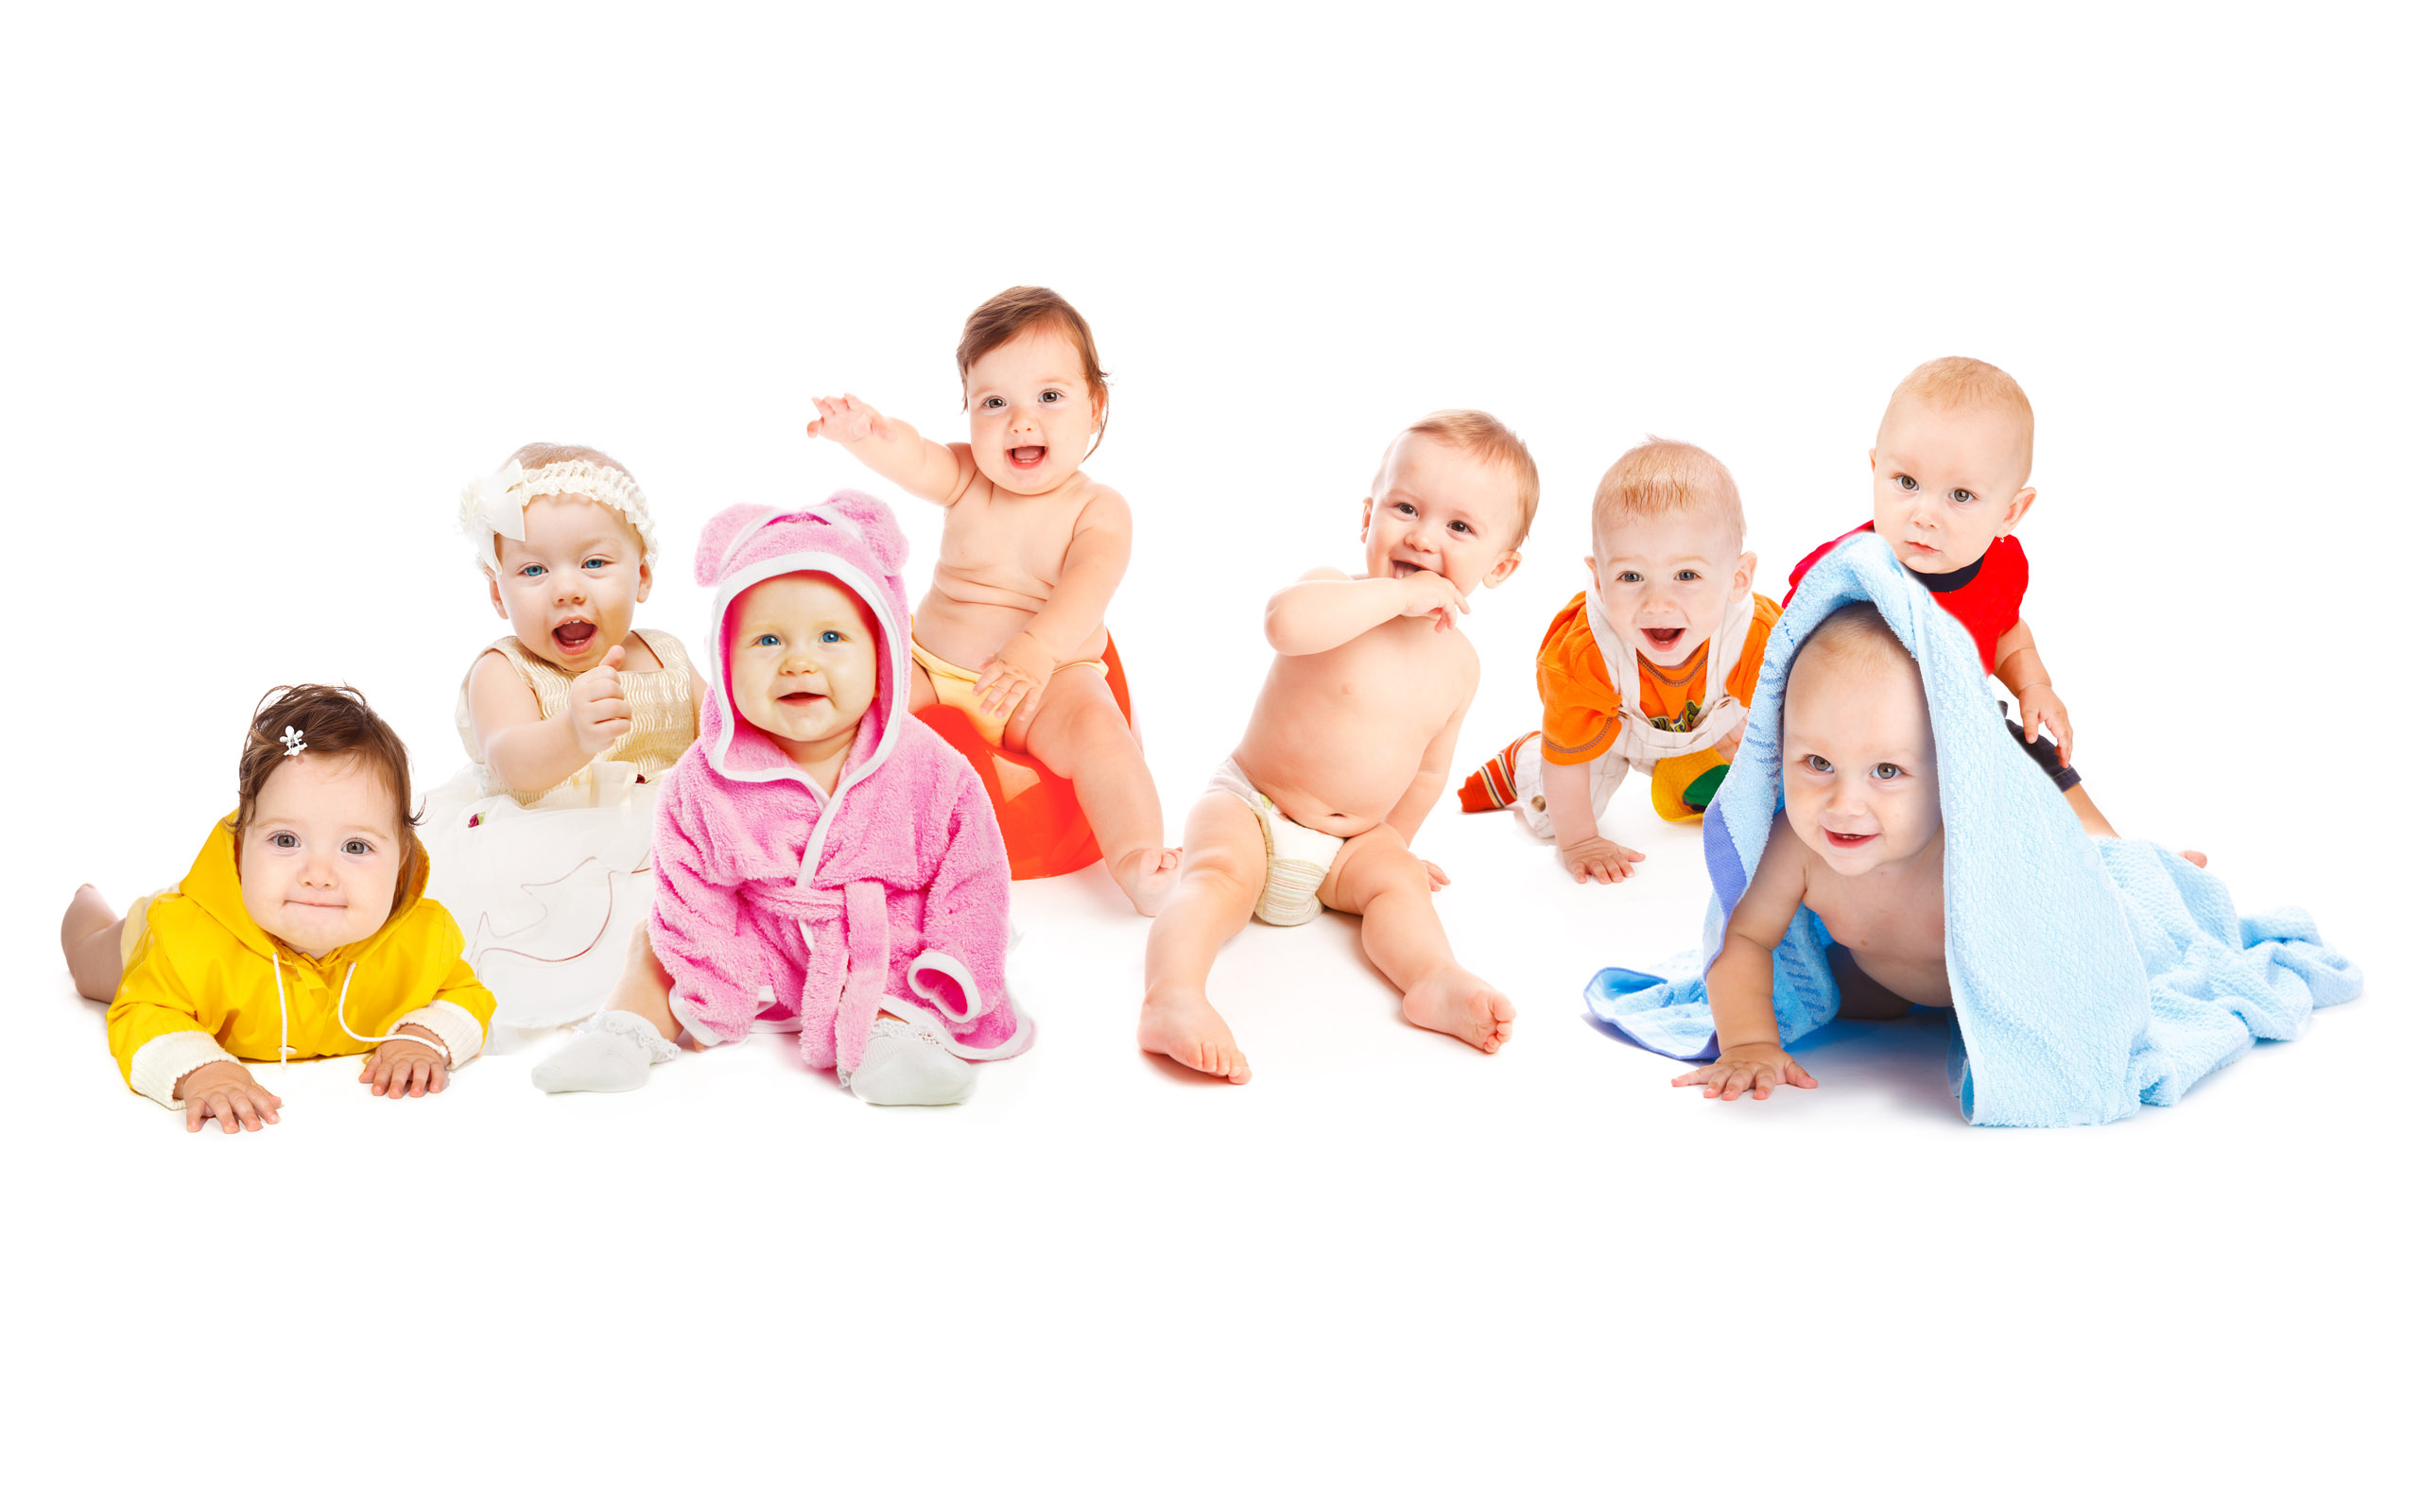 happy group babies wallpaper mother holding baby wallpaper blue eyes